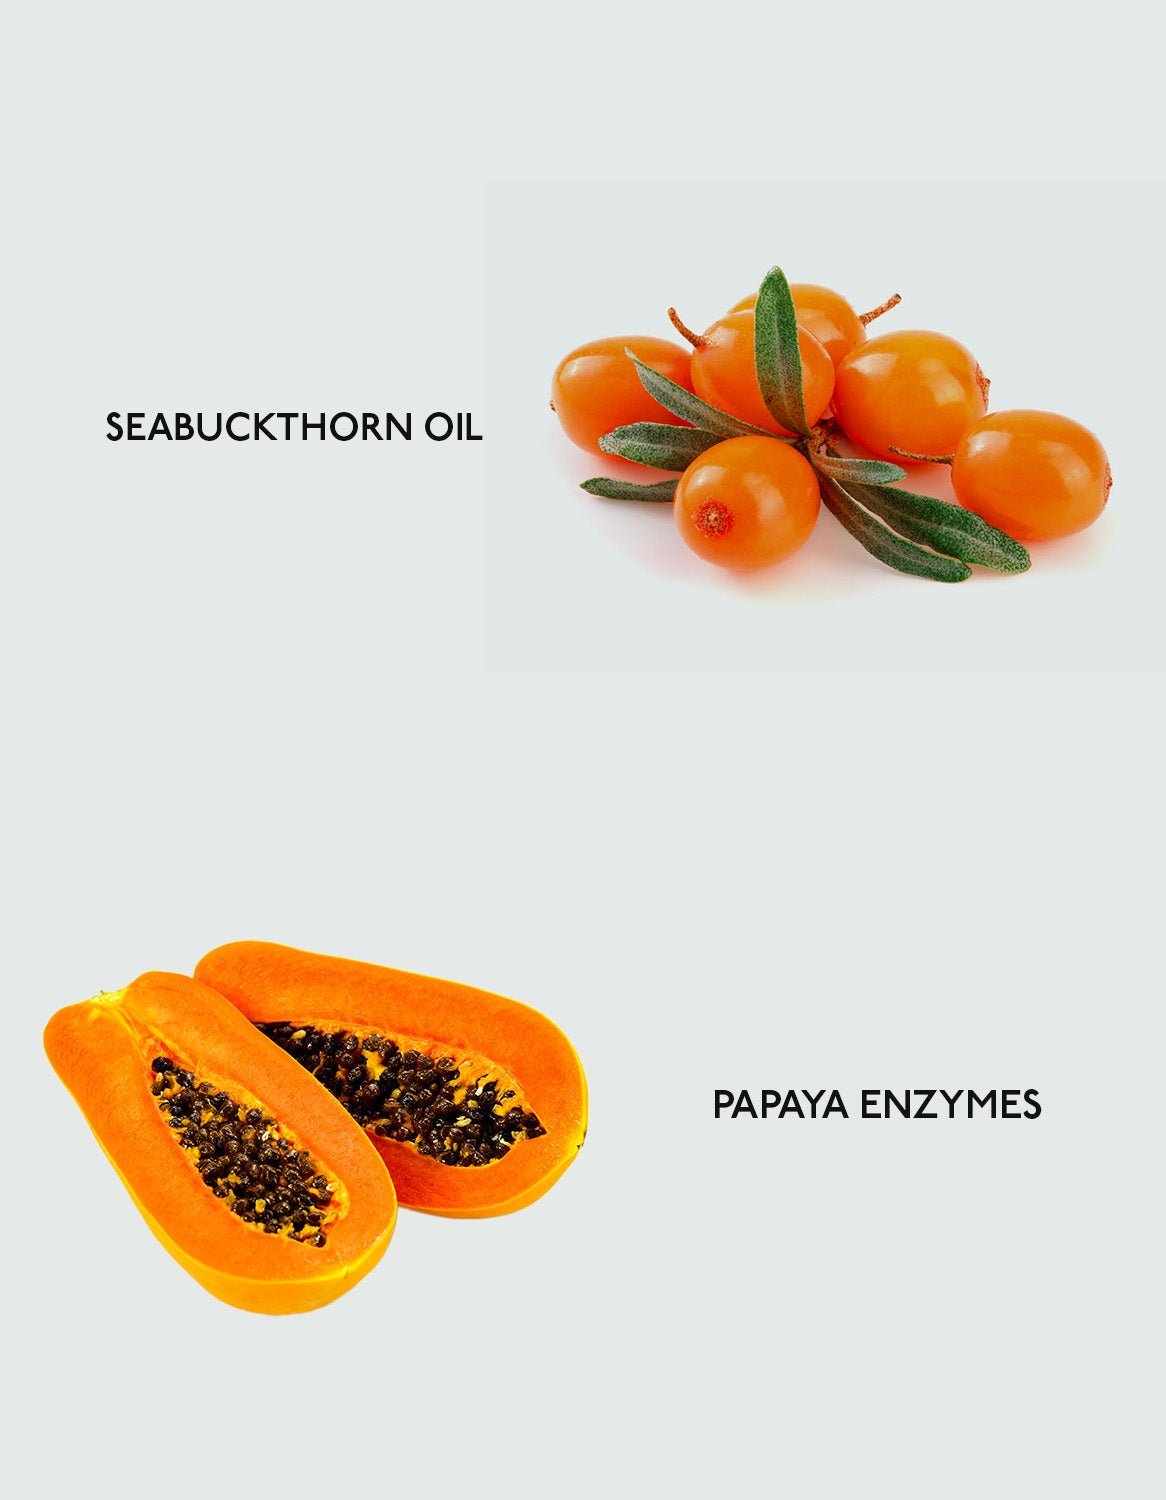 Image displaying two items: "Oil Cleanser" by Cozy Earth featuring several orange seabuckthorn berries with green leaves, and "Papaya Enzymes" showcasing a halved papaya revealing its orange flesh and black seeds.